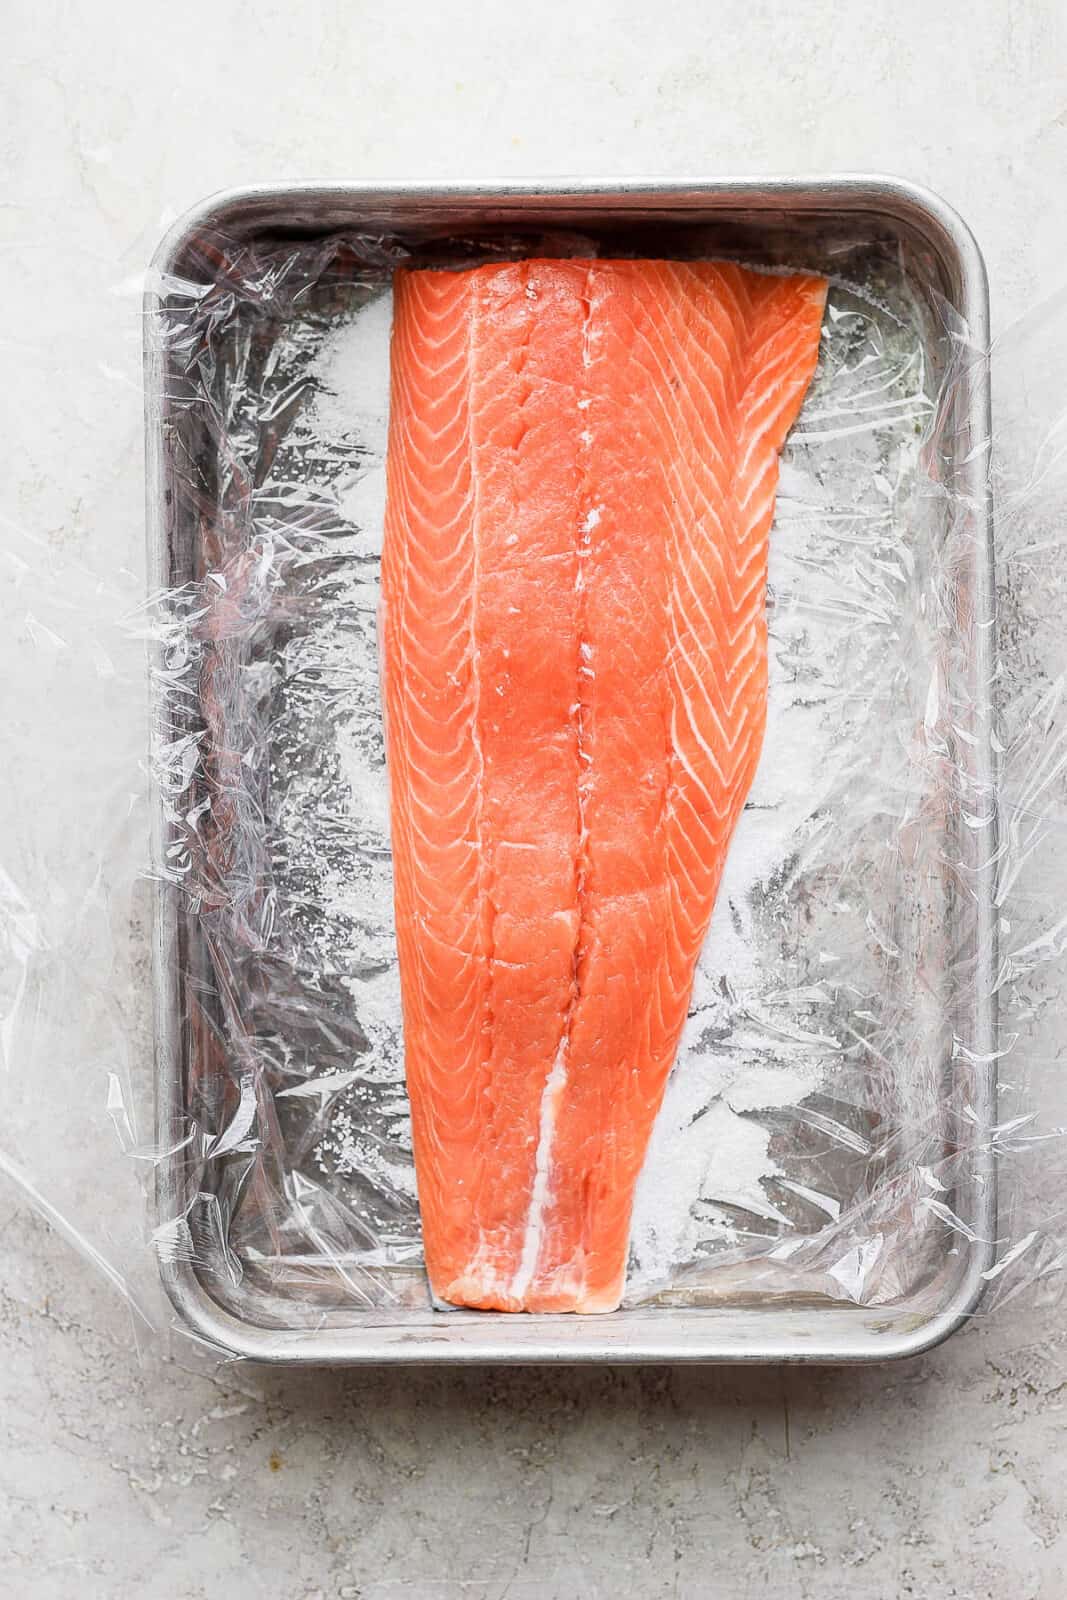 A raw fillet of salmon inside a baking dish.